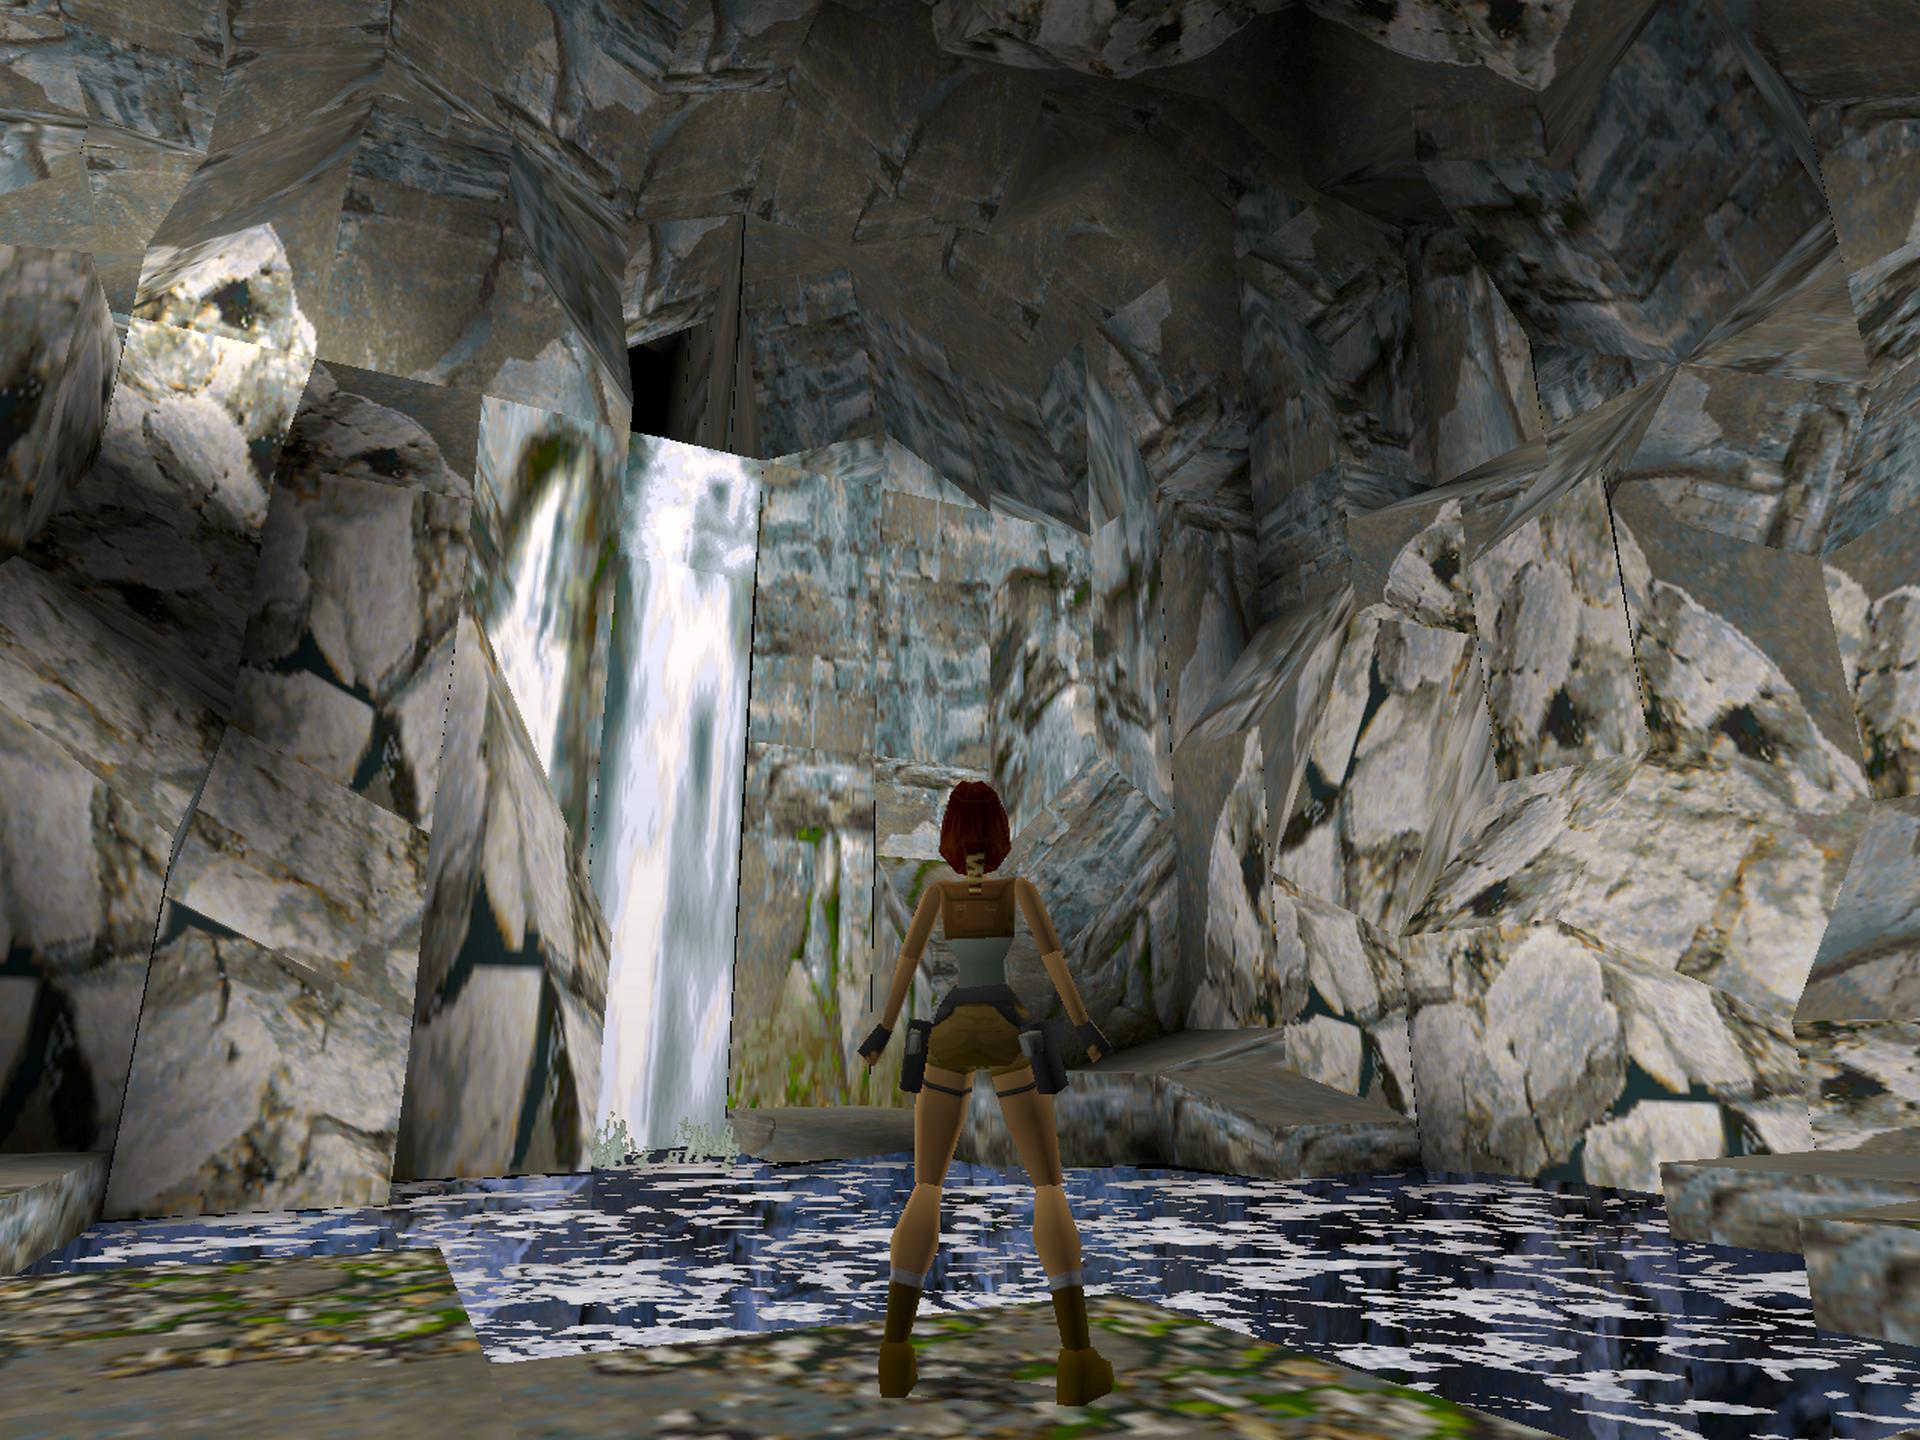 Tomb Raider One 1996 Picture Gallery Section Lara Croft Online Tomb Raider